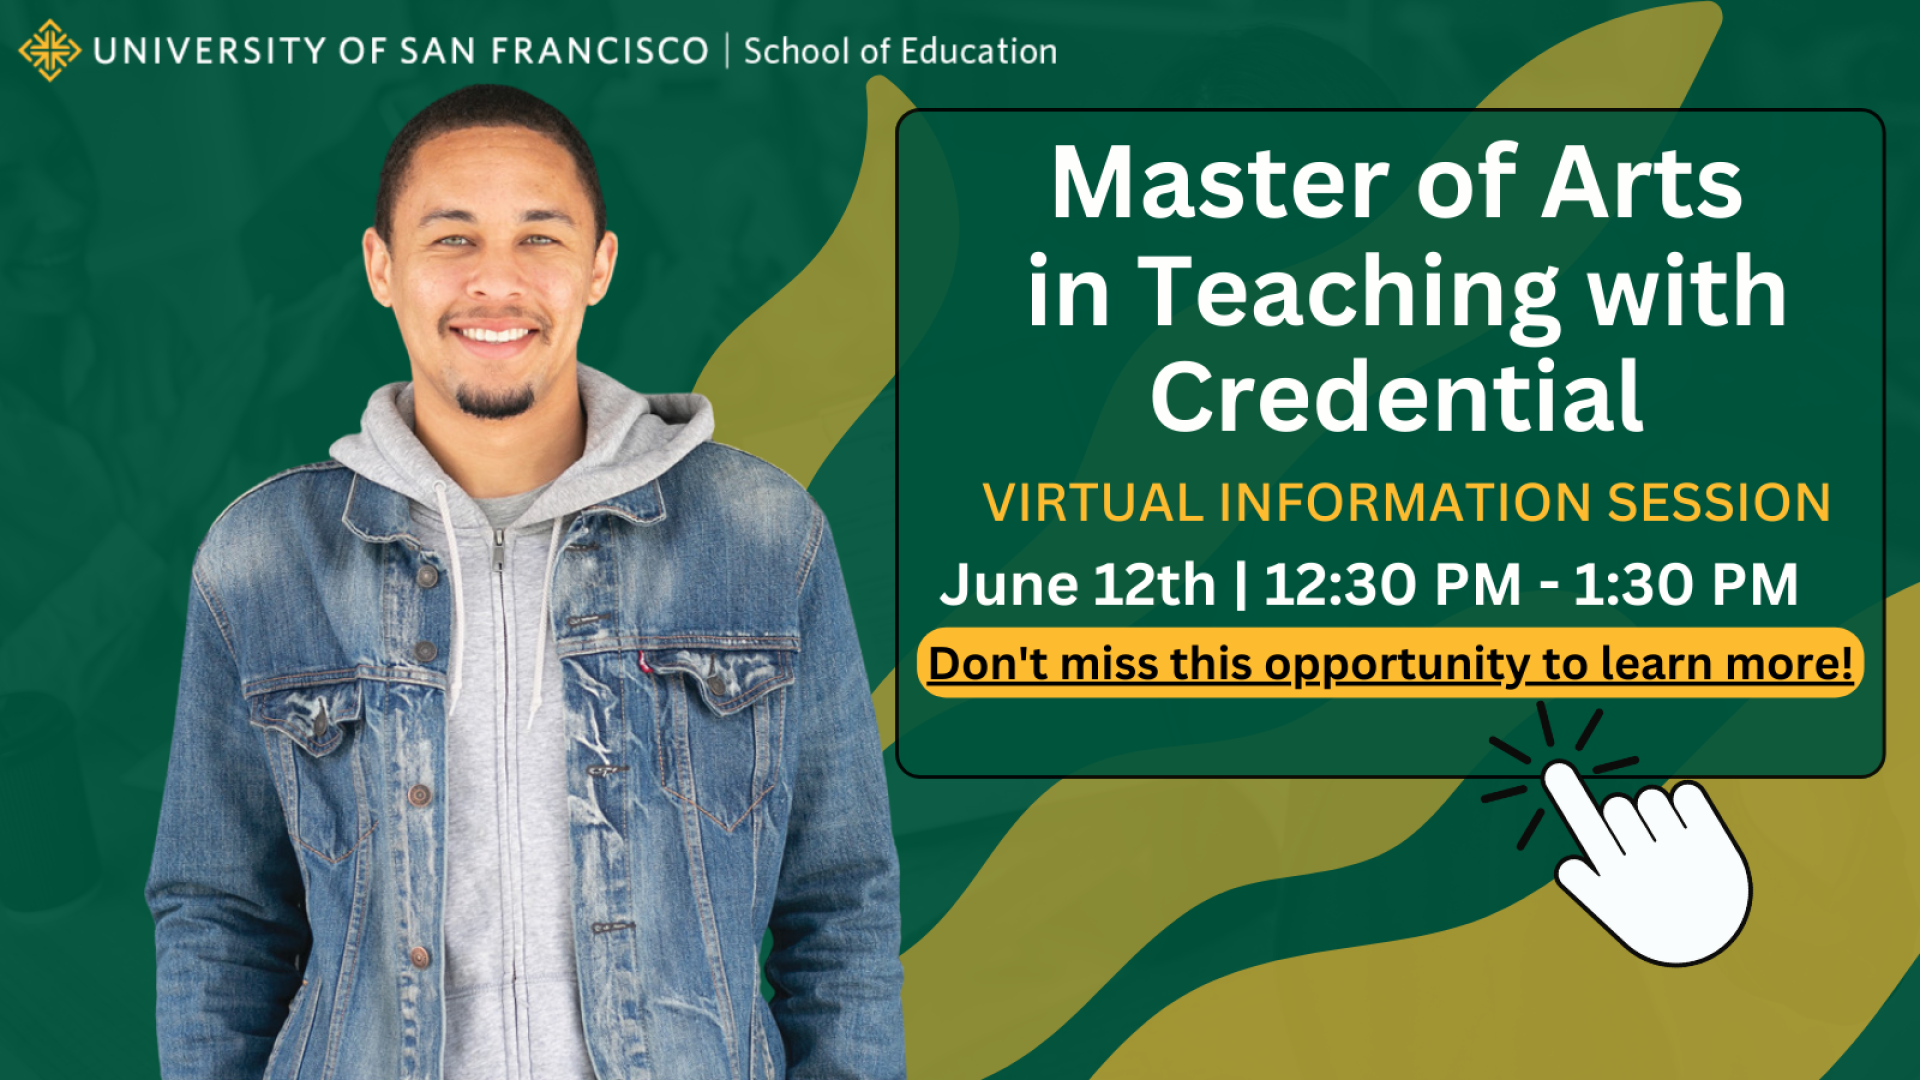 Master of Arts in Teaching with Credential Virtual Information Session - East Bay